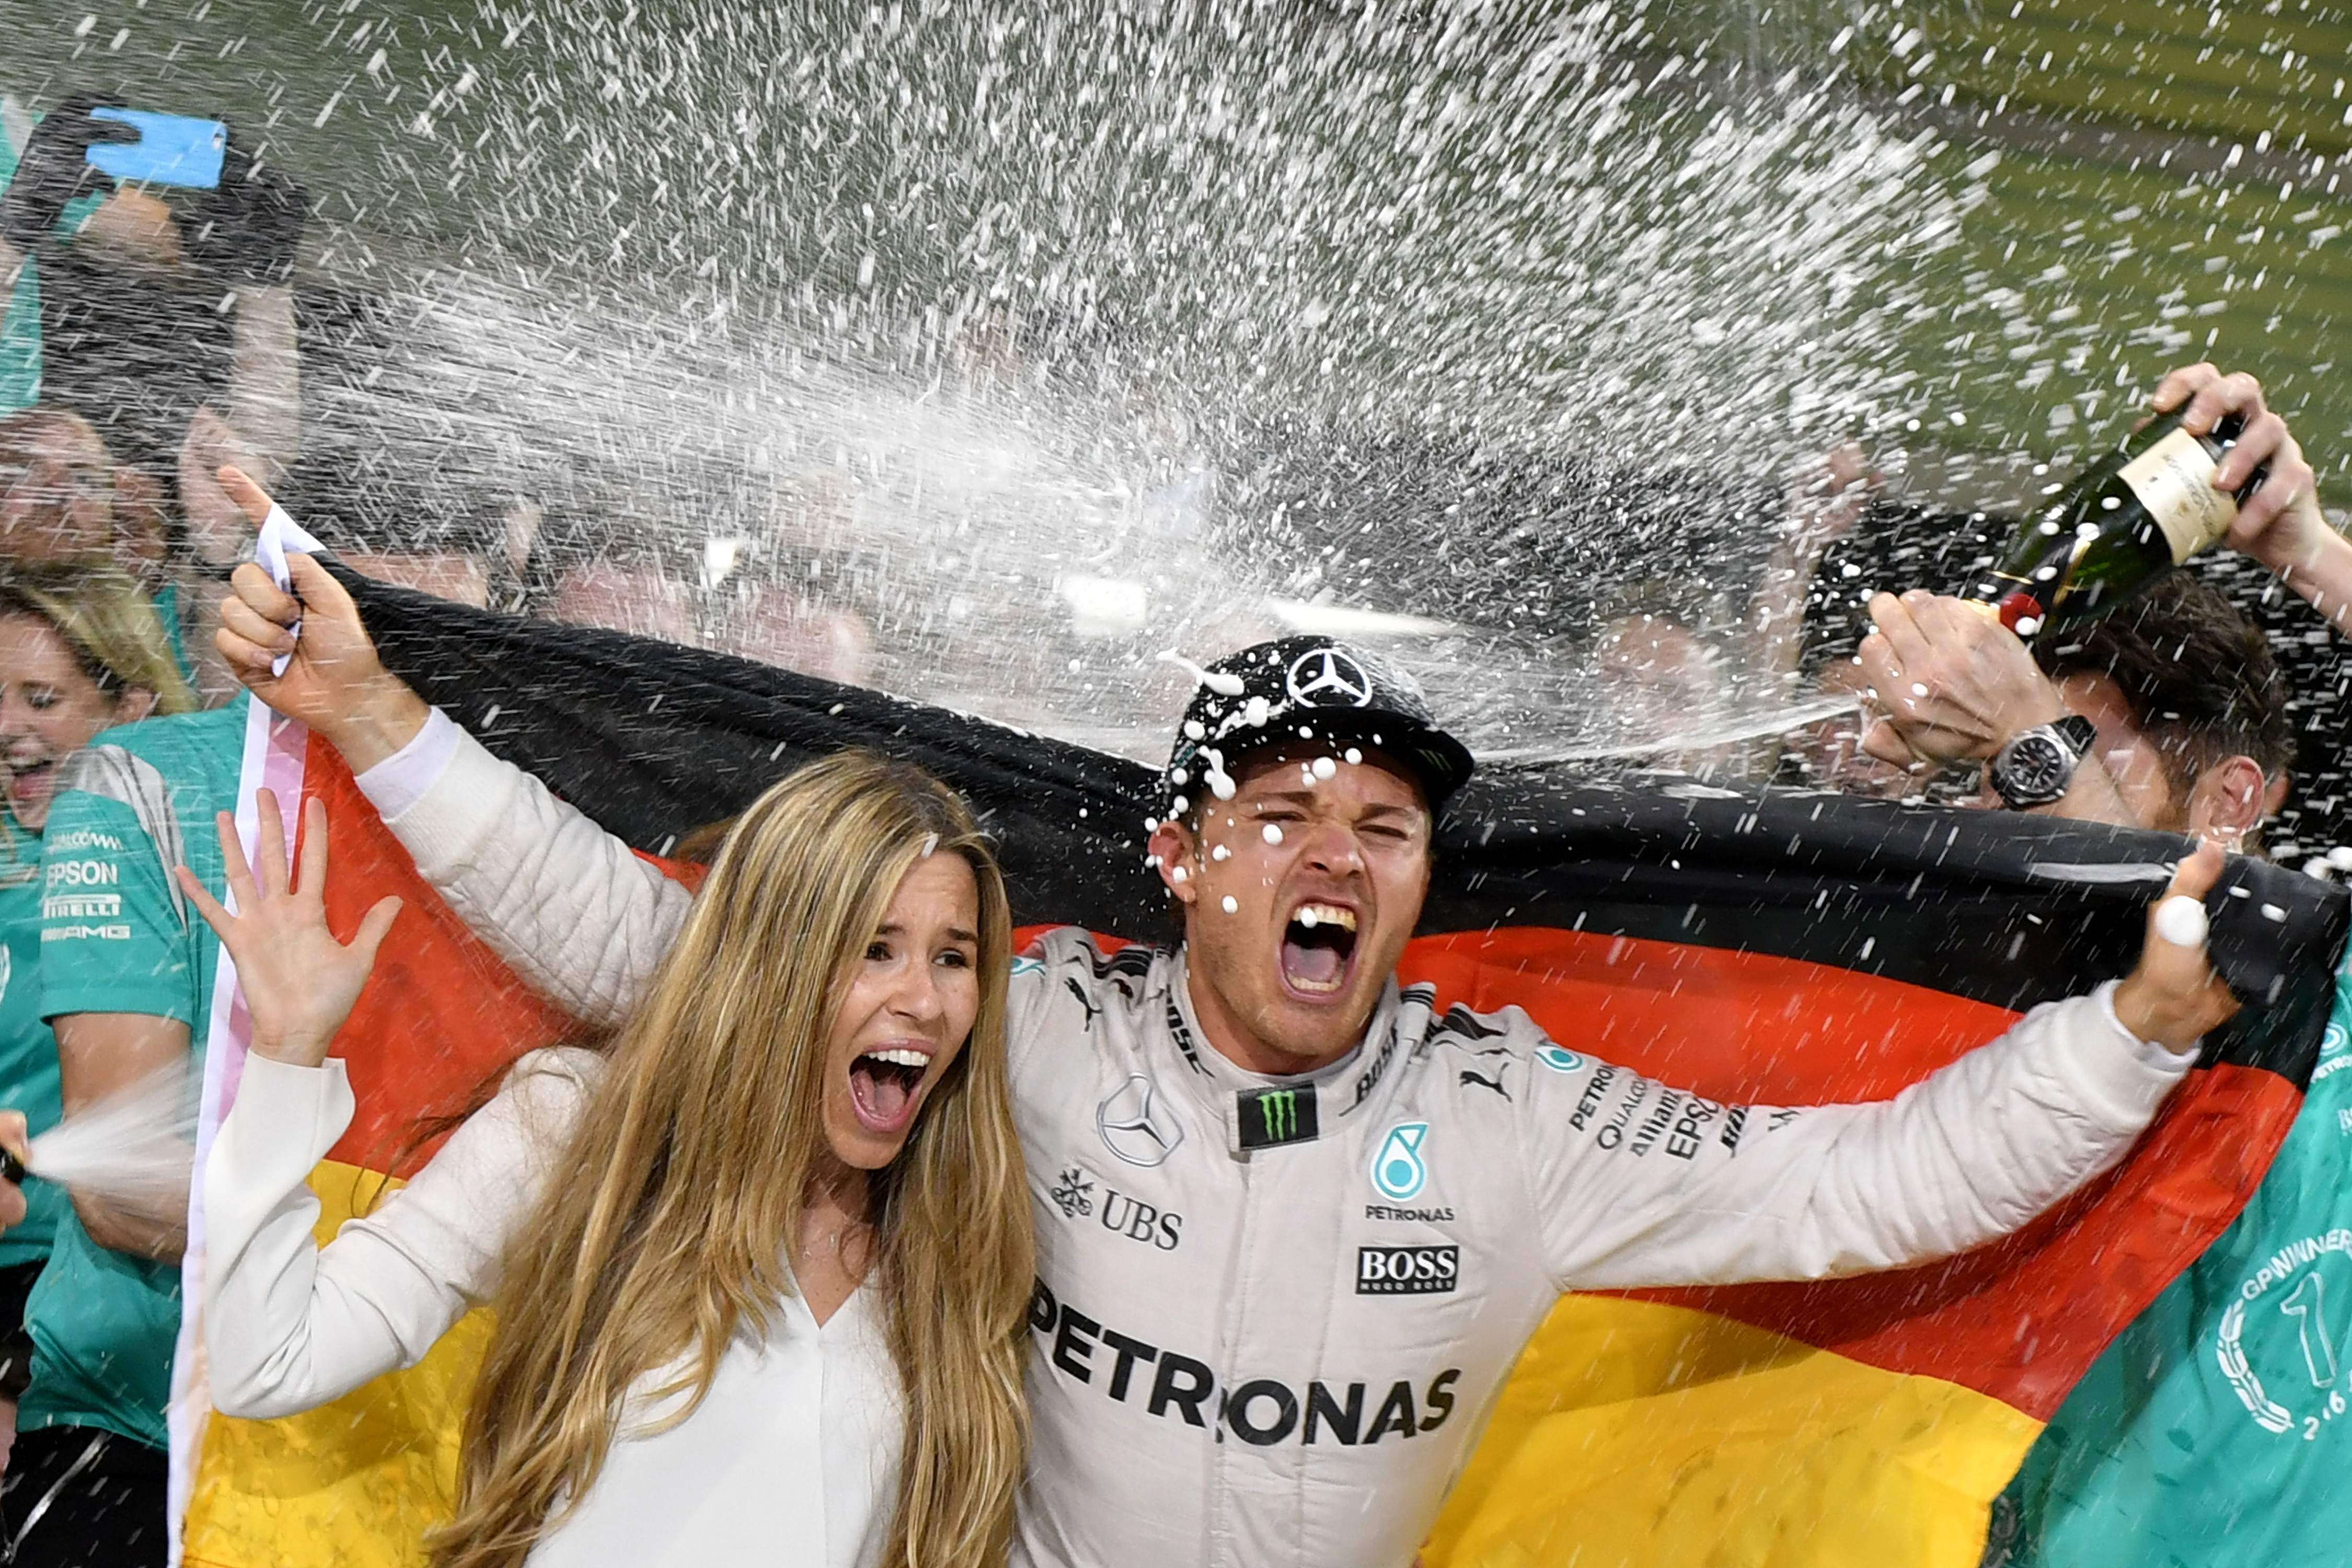 Nico Rosberg and his wife Vivian Sibold get the champagne treatment as they celebrate Rosberg winning the Formula One world championship at the season-ending Abu Dhabi Grand Prix. German fans won’t see their new world champion on home soil next season. Photo: AFP